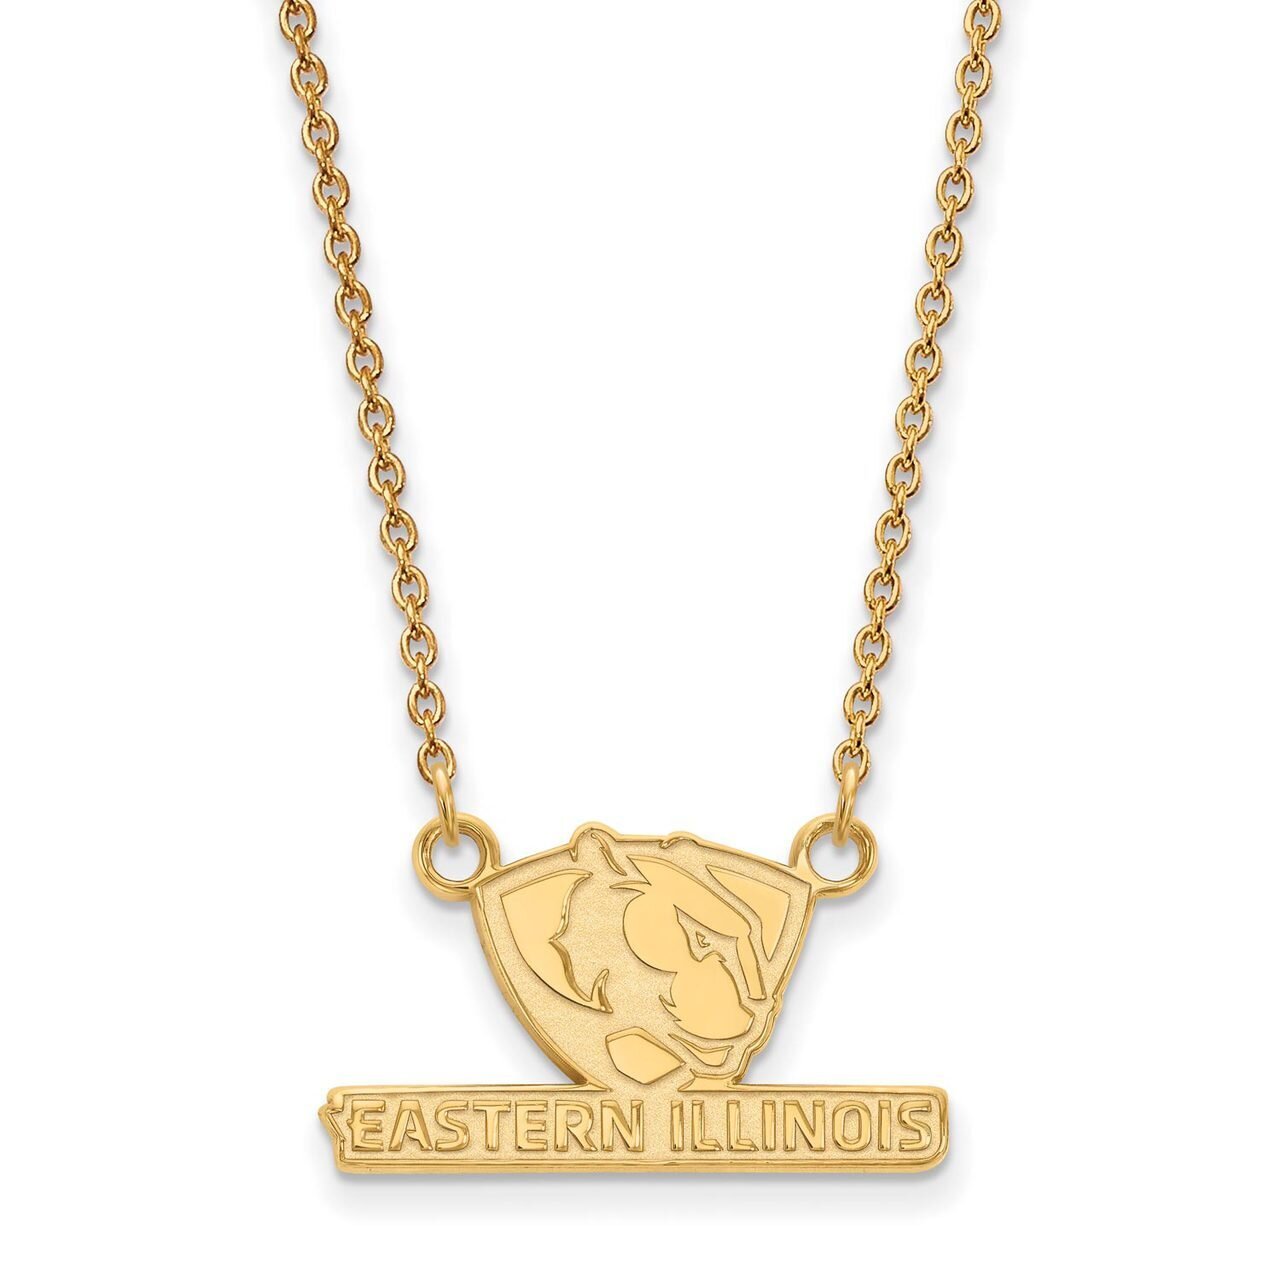 Eastern Illinois University Small Pendant with Chain Necklace 10k Yellow Gold 1Y007EIU-18